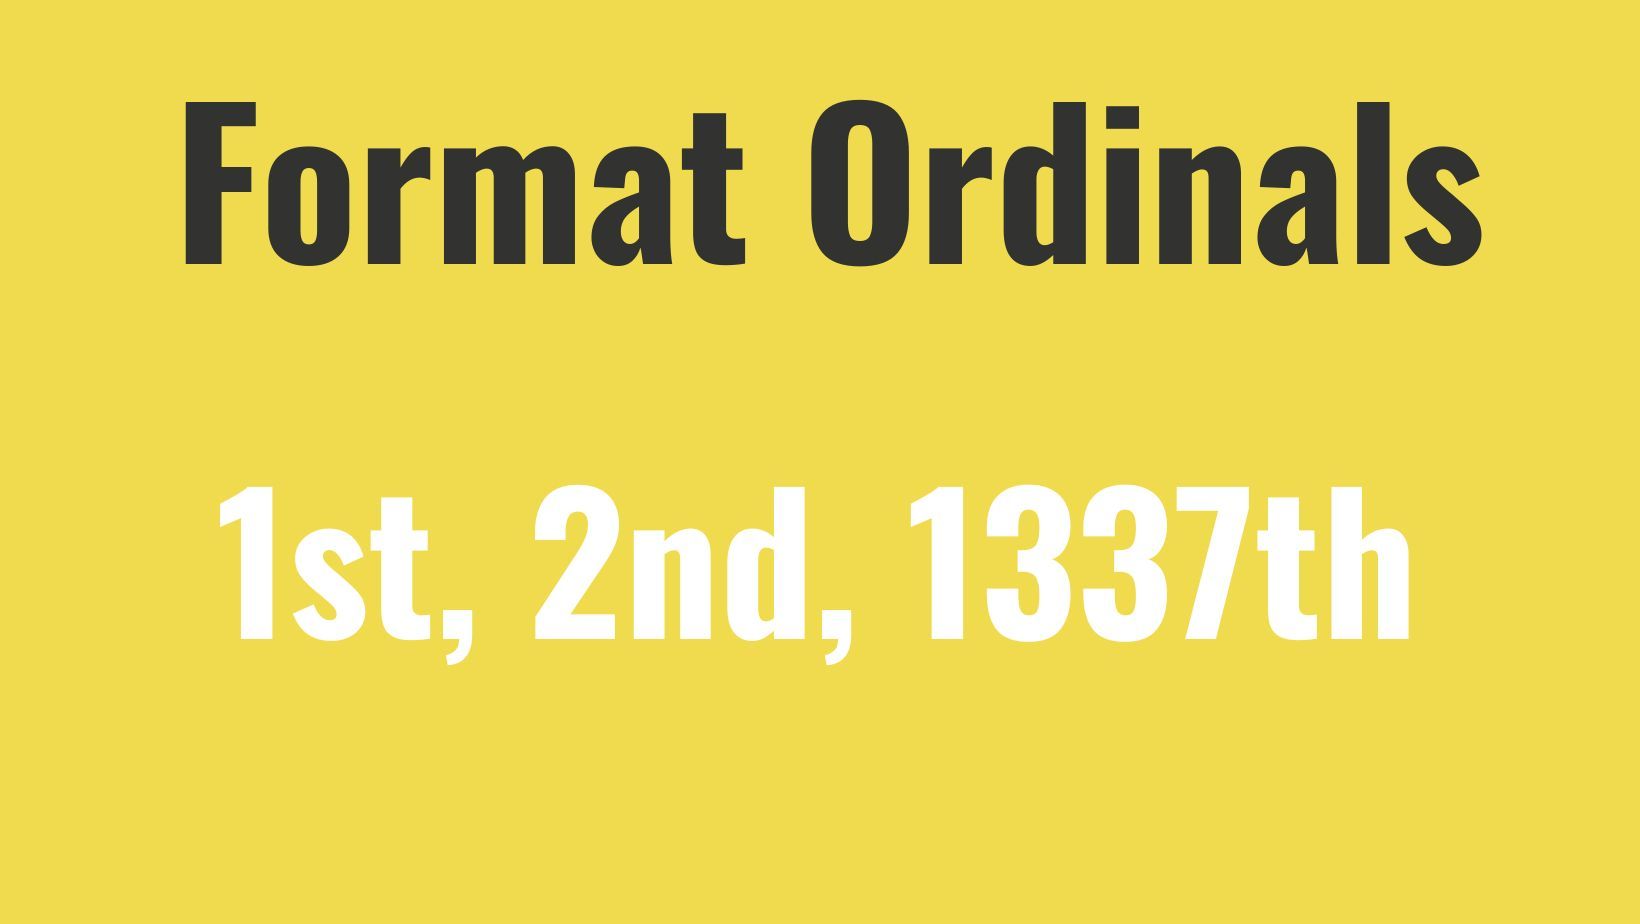 Format numbers to Ordinals